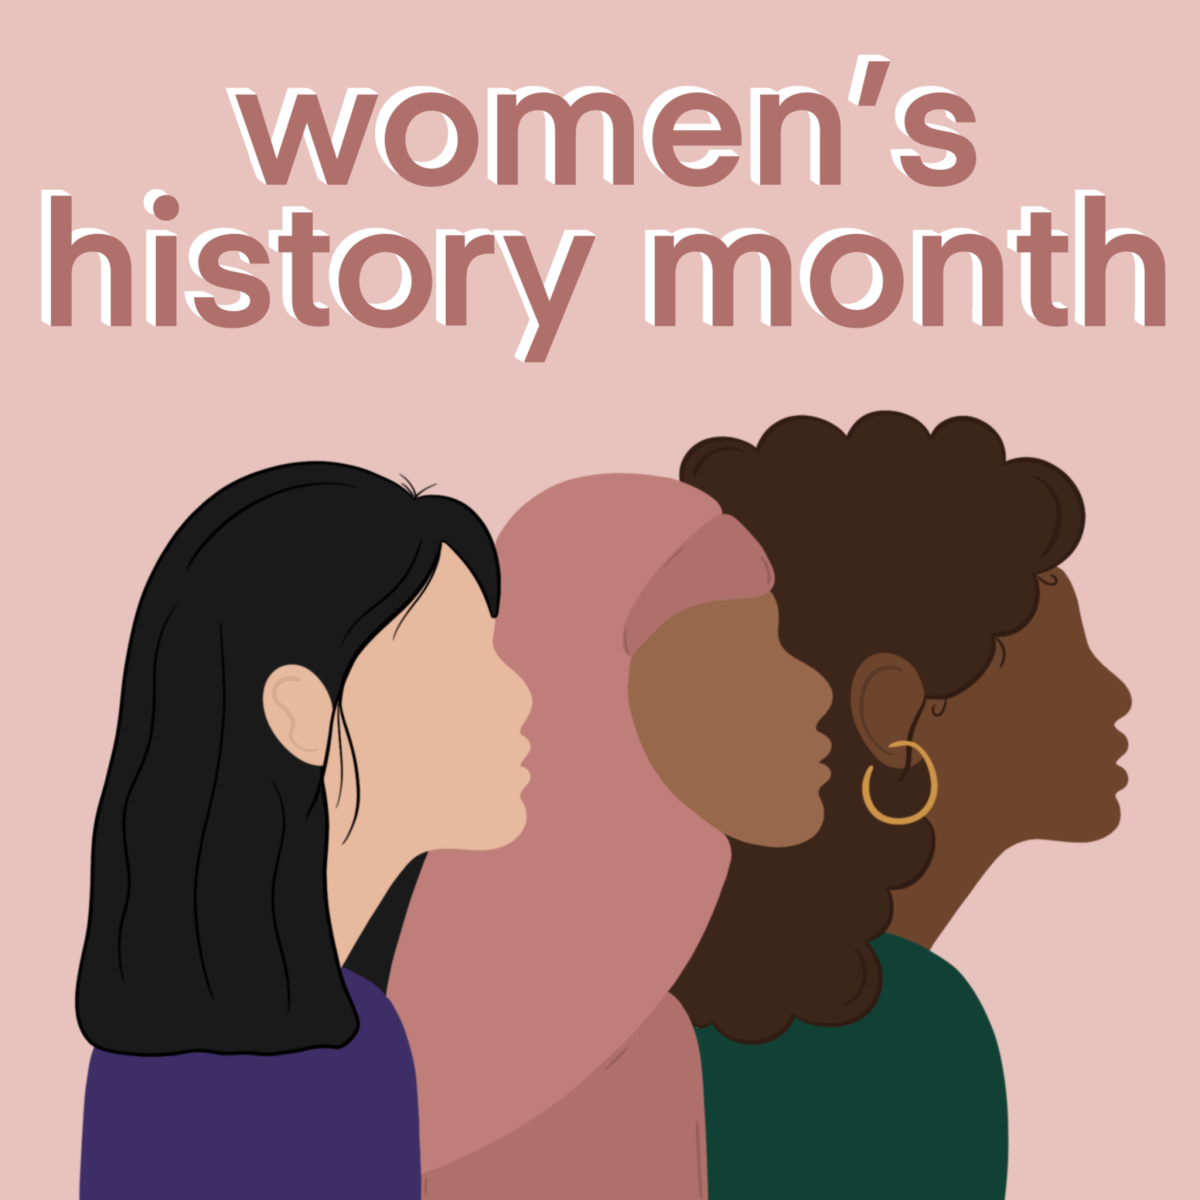 March 1 marks the beginning of Womens History Month, a month long celebration of the contributions of women in history and society. 